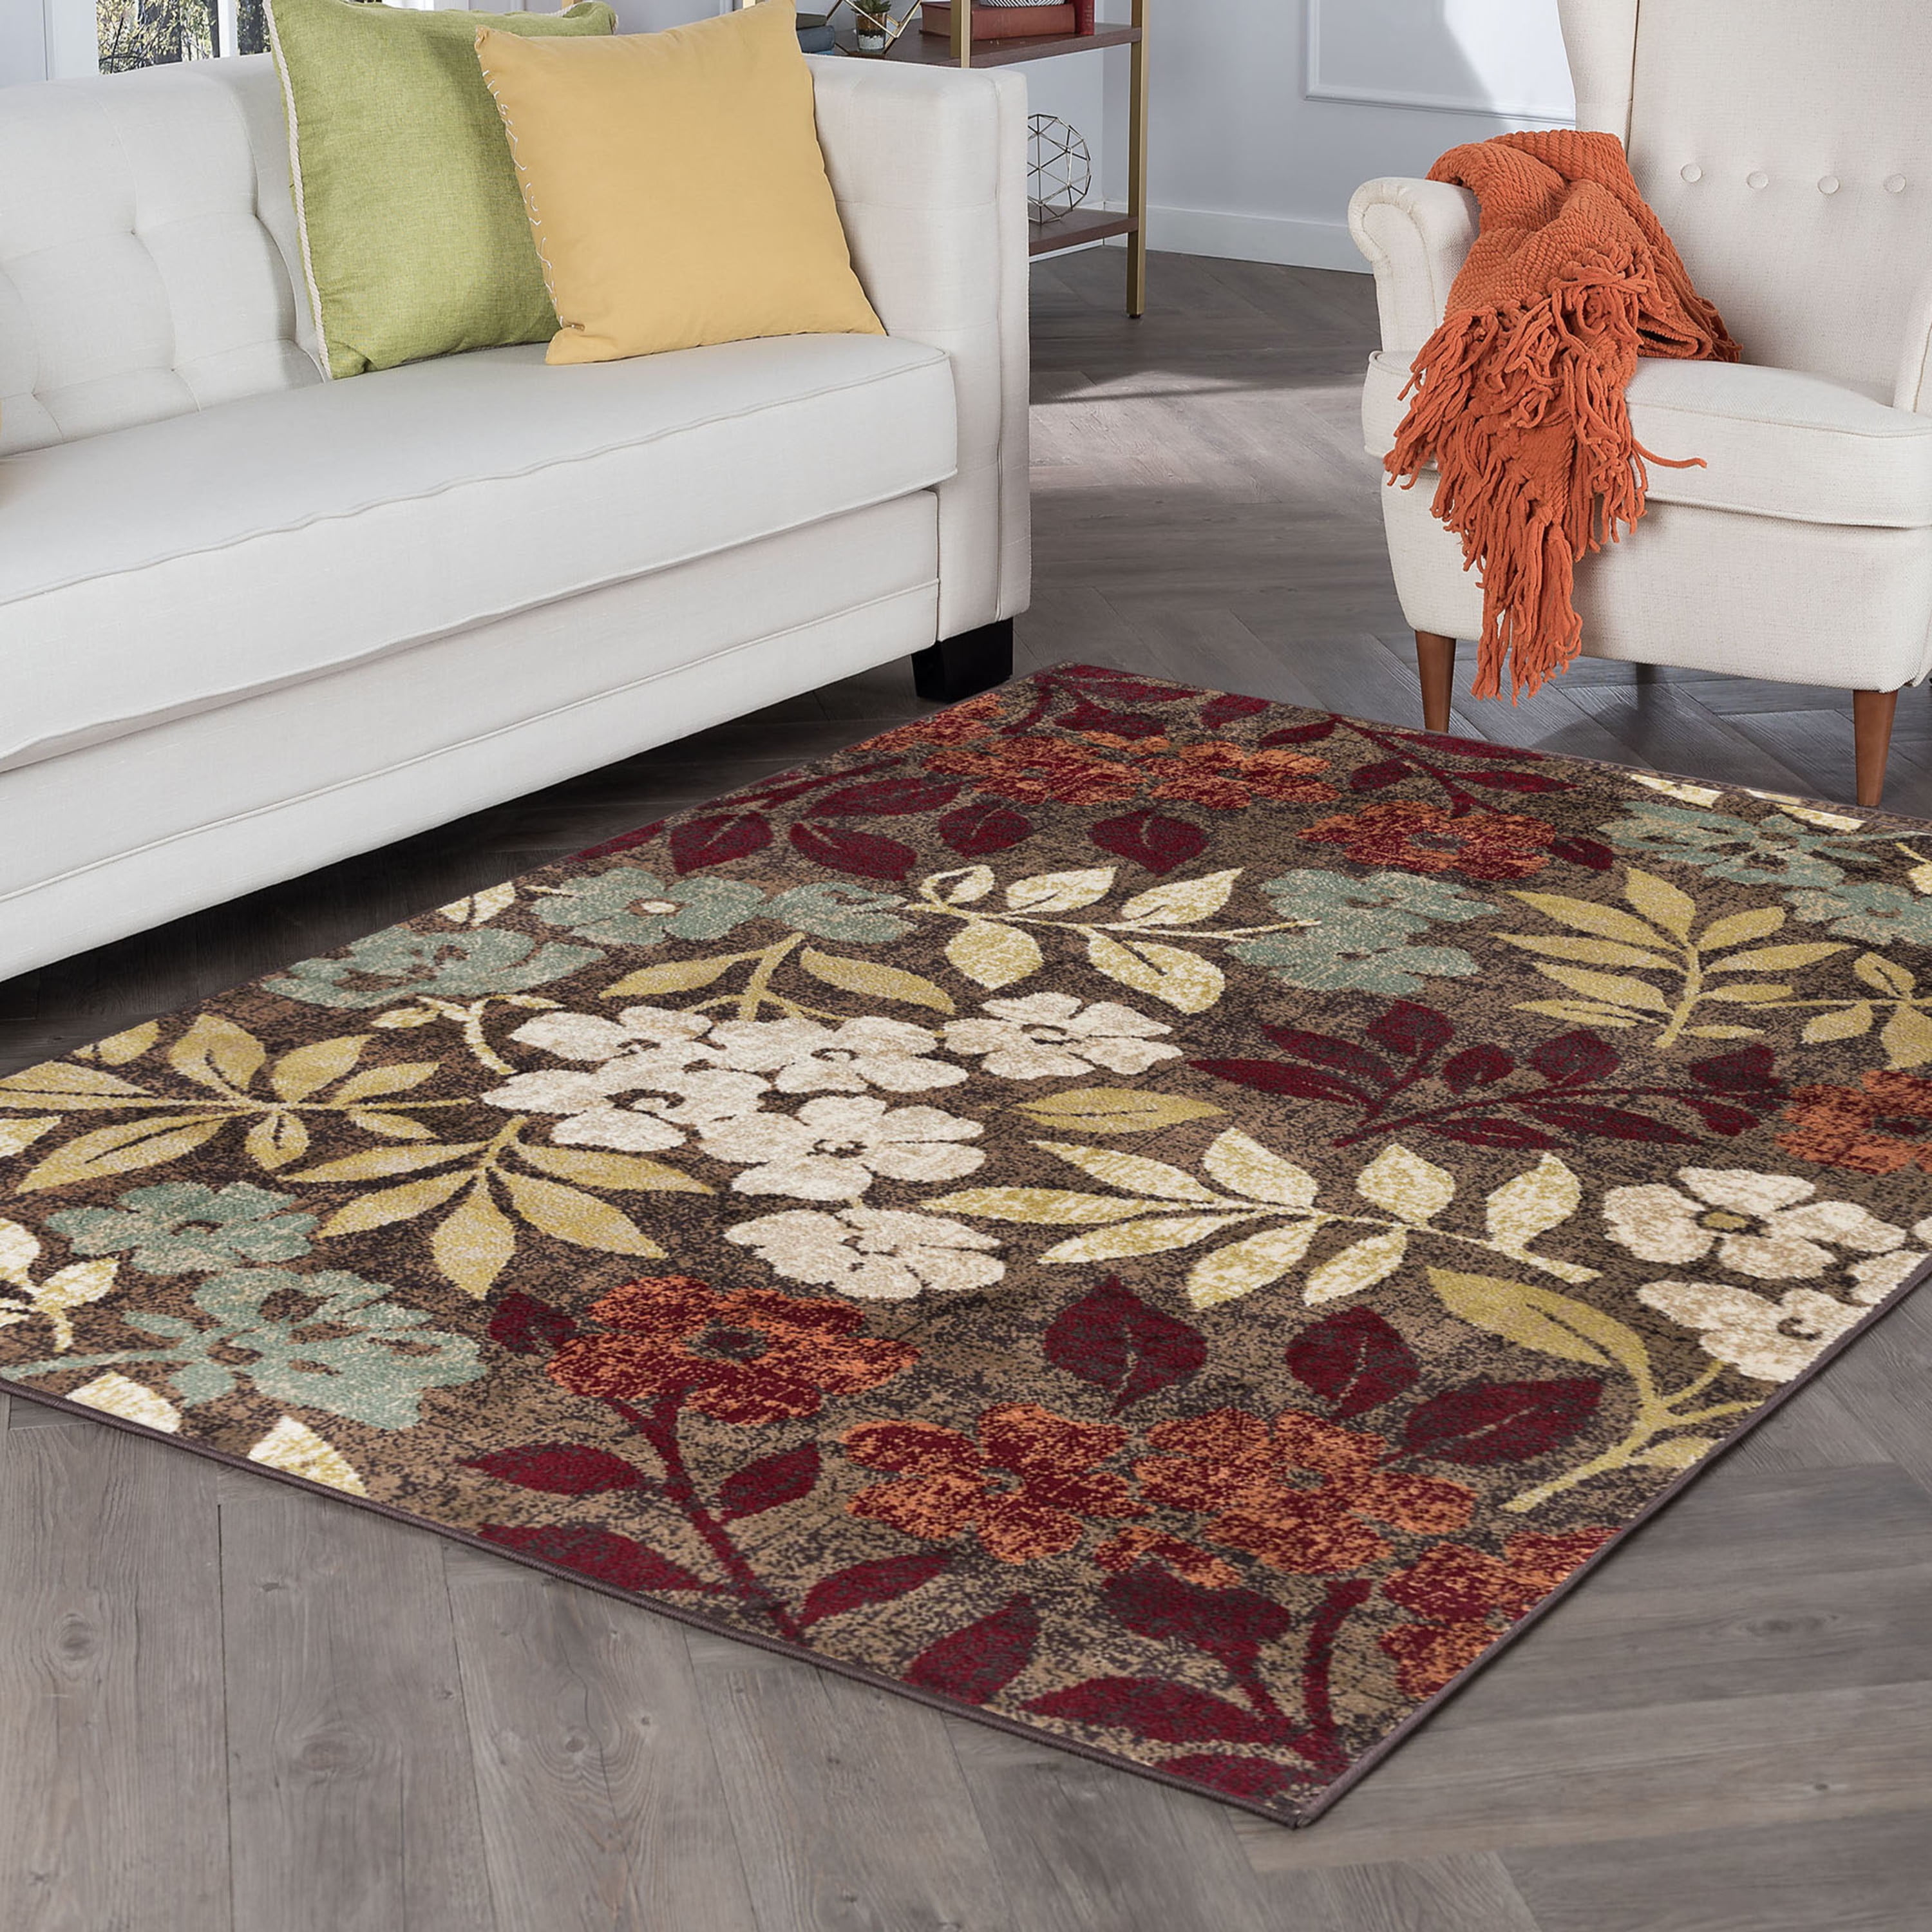 World Rug Gallery Floral Tropical Indoor/Outdoor Area Rug - Blue 5' x 7